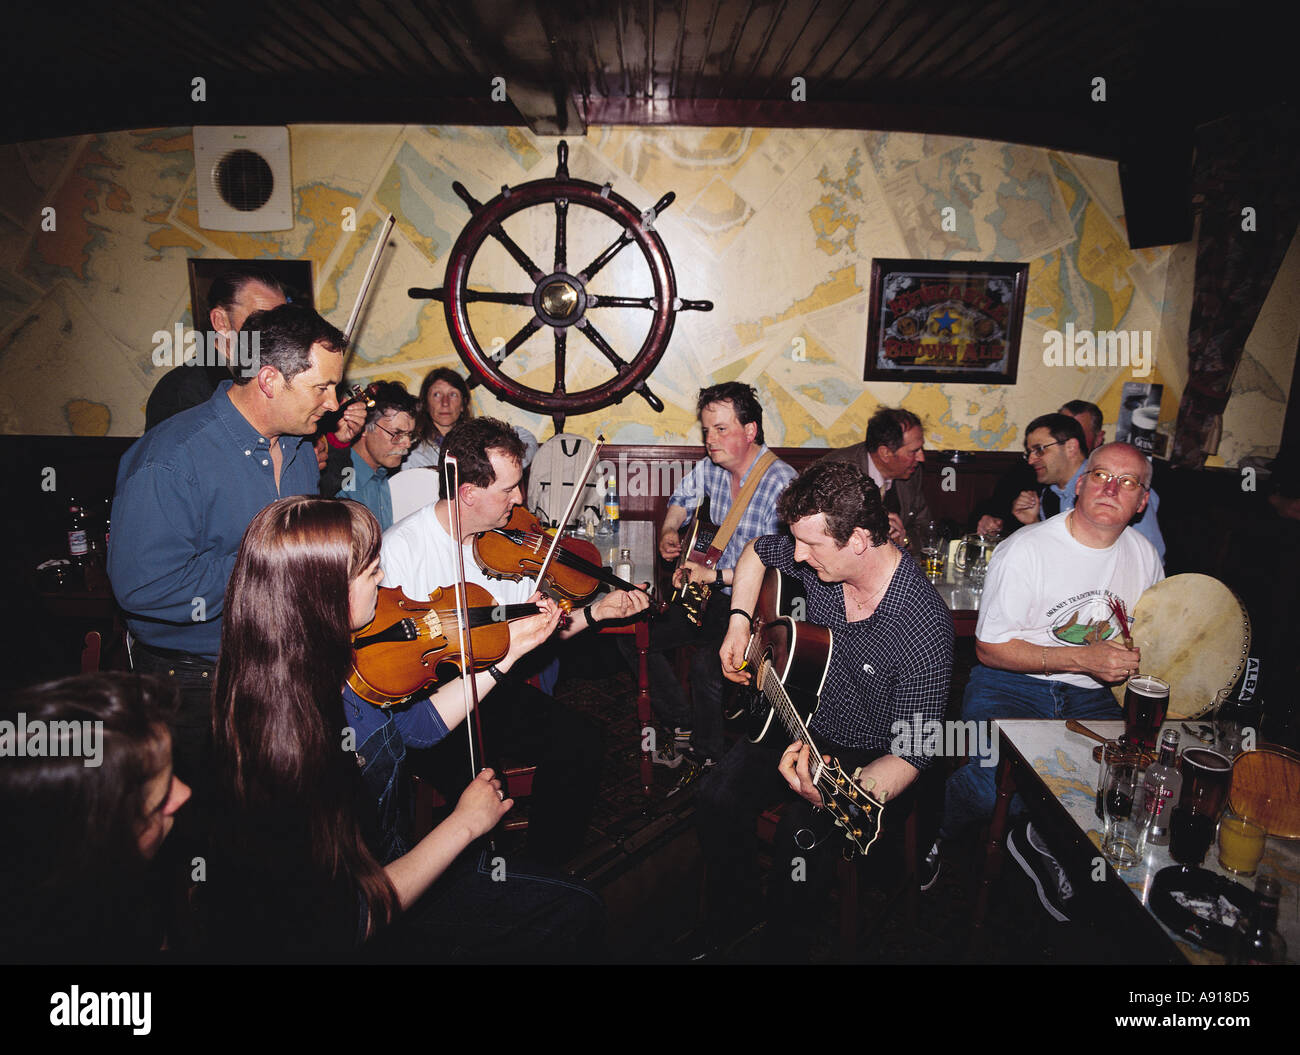 dh Orkney Folk Festival STROMNESS  PUB ORKNEY SCOTLAND Traditional Scottish group guitars violins in public house music uk people interior Stock Photo